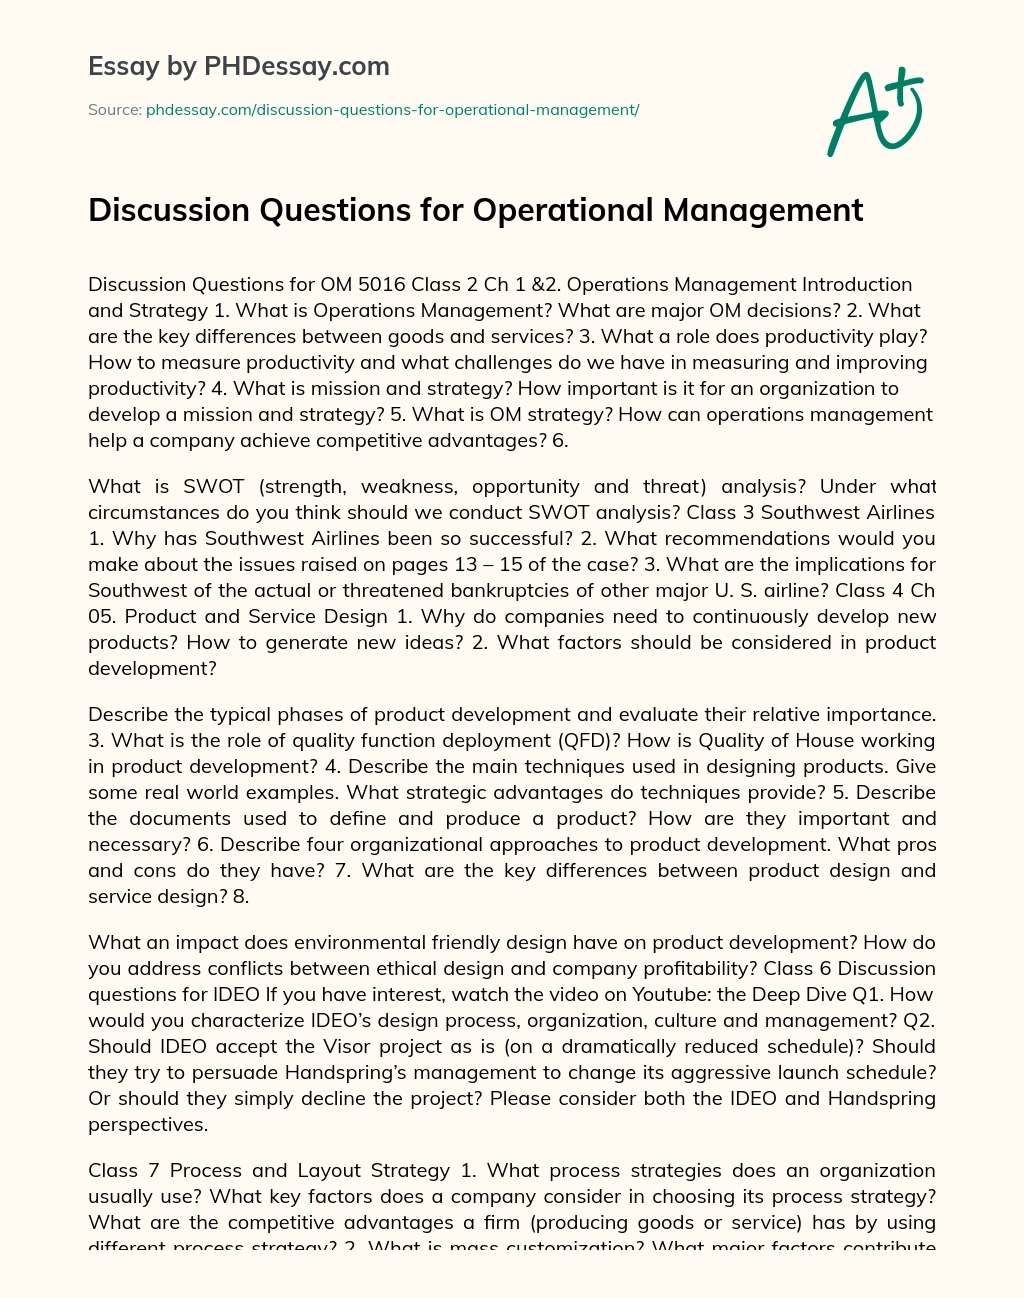 Discussion Questions for Operational Management essay